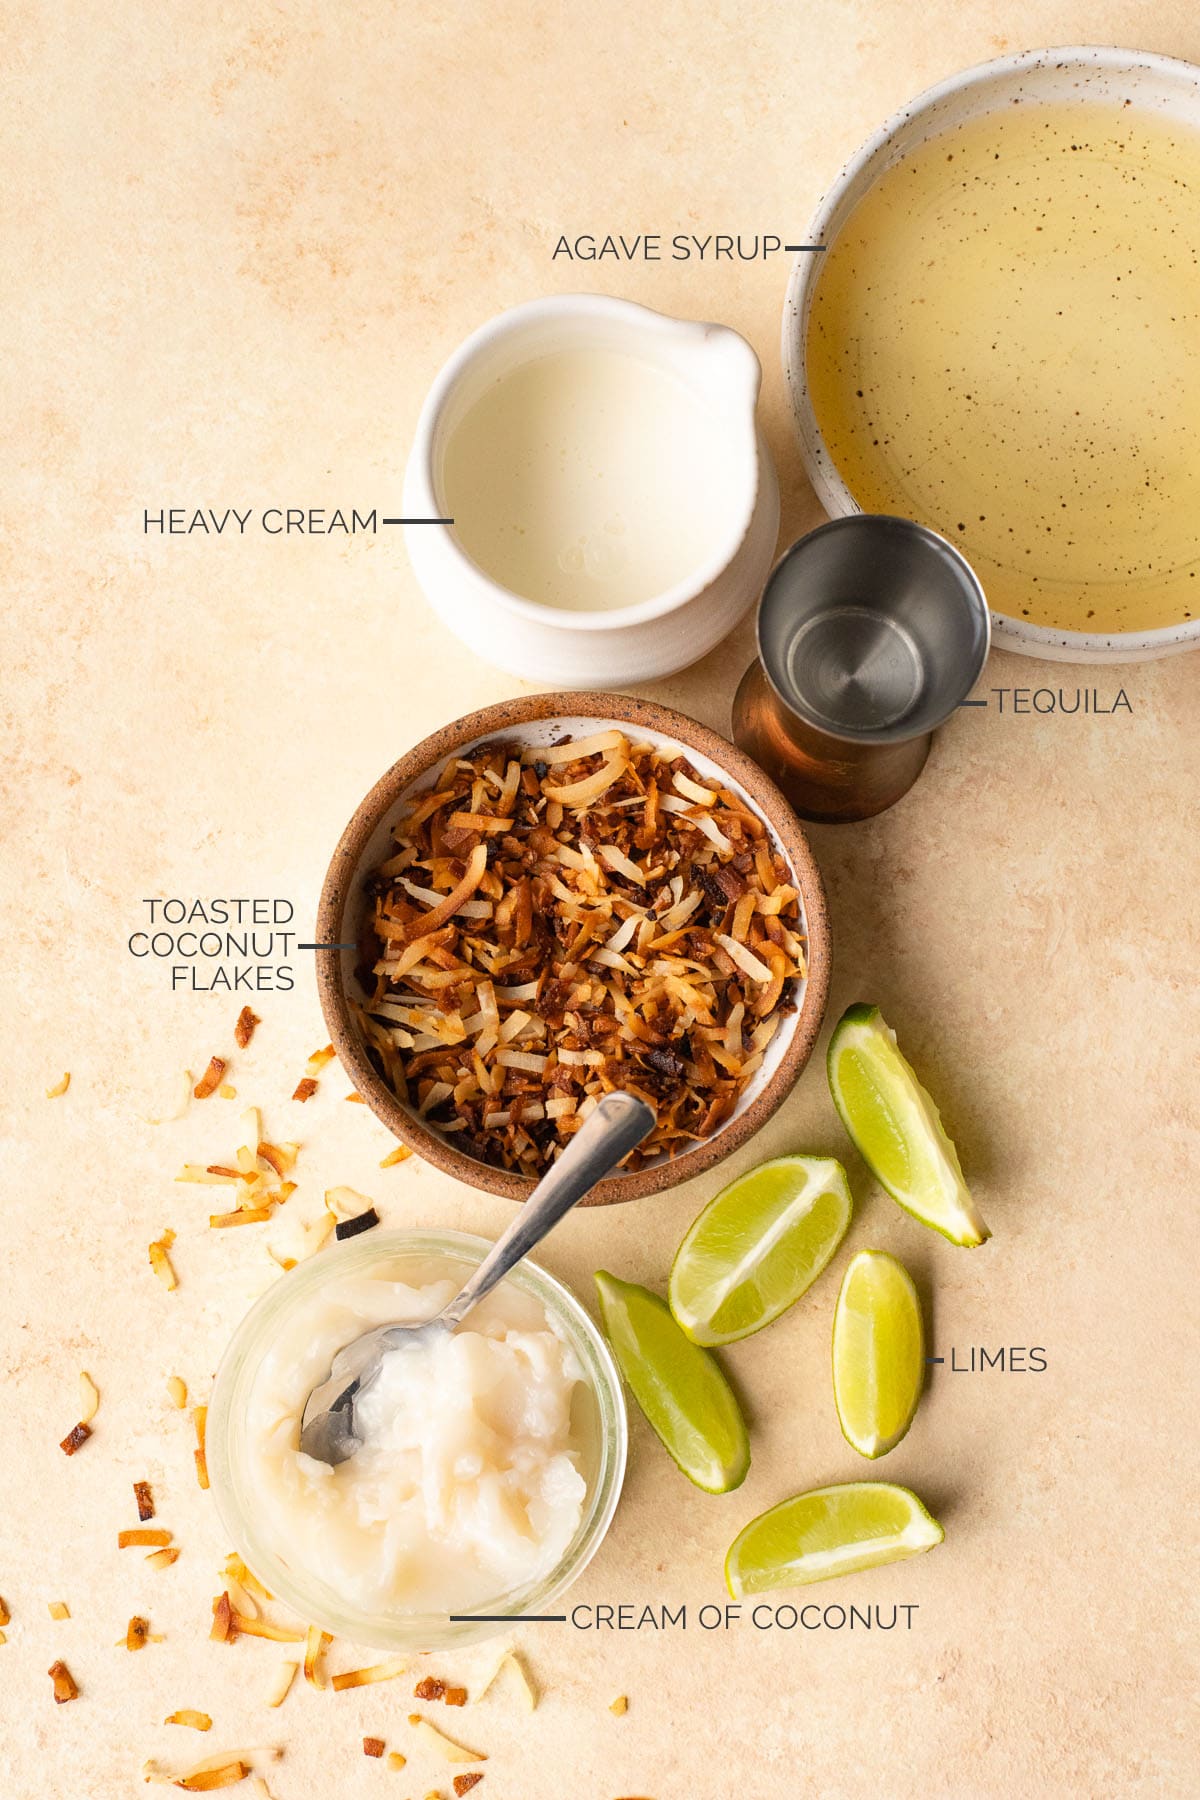 Agave syrup, heavy cream, toasted coconut flakes, limes, cream of coconut, and tequila.